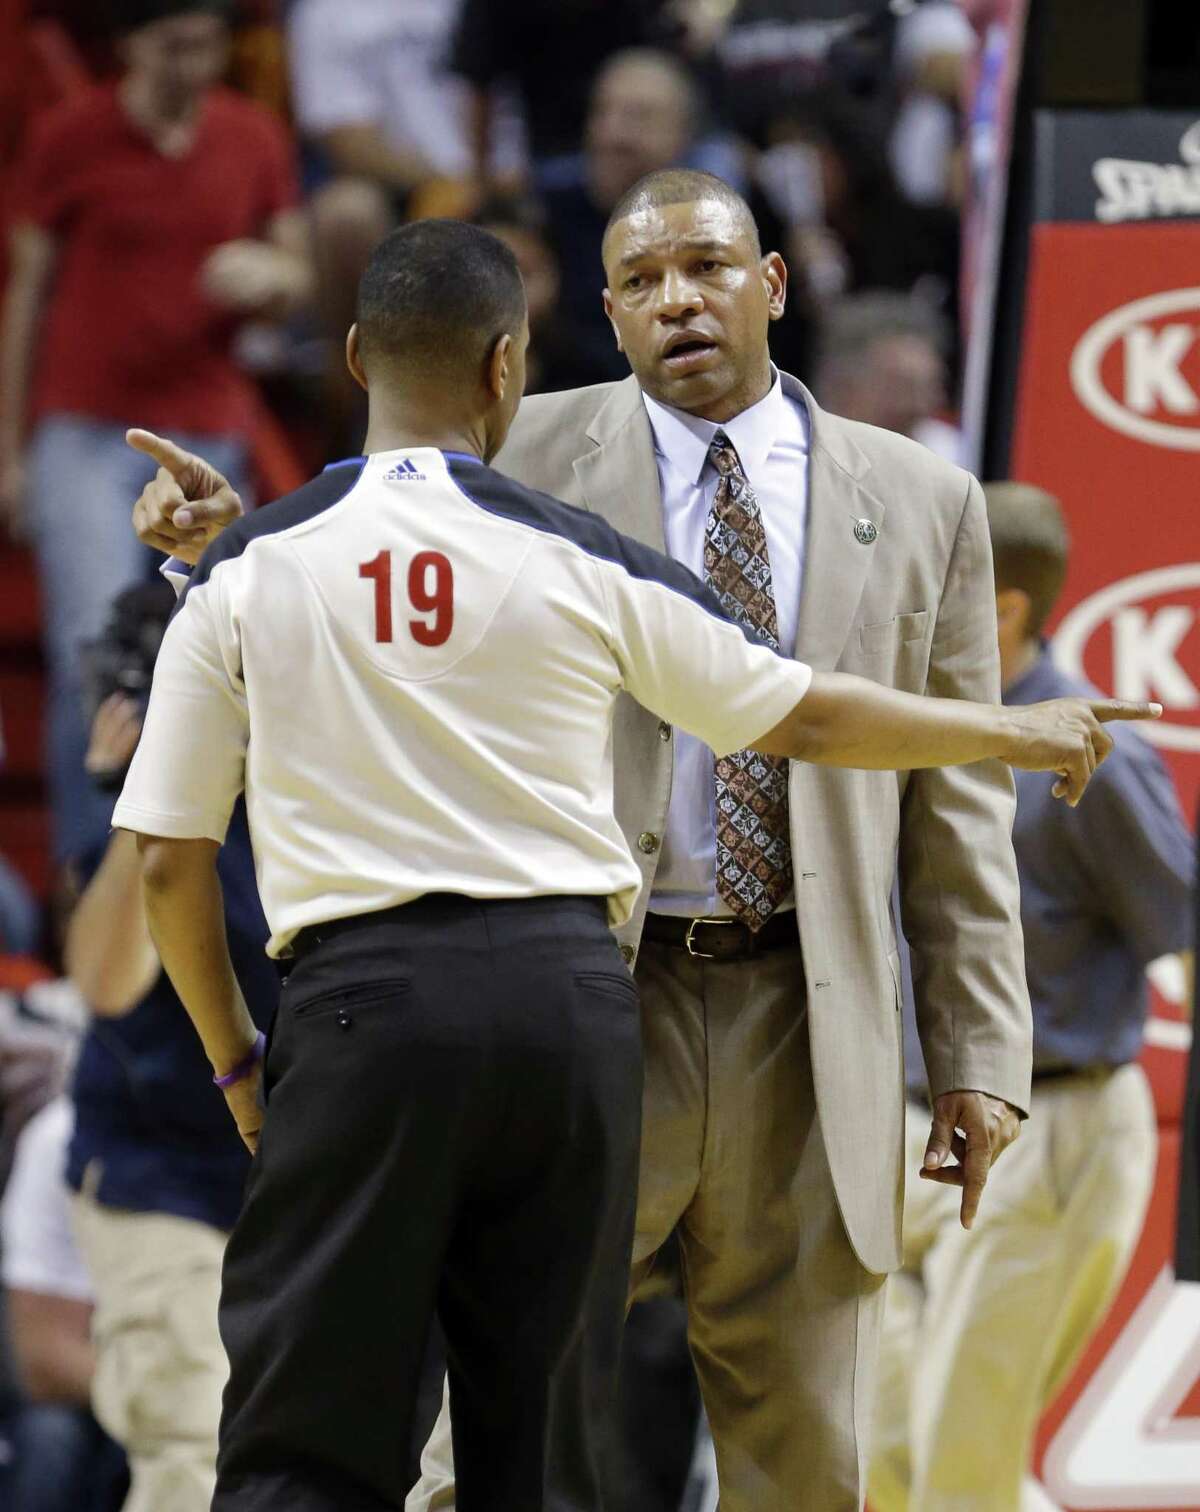 Boston Celtics head coach Doc Rivers, rear, argues a call with referee James Capers (19) during the second half of an NBA basketball game against the Miami Heat, Friday, April 12, 2013 in Miami. The Heat defeated the Celtics 109-101. (AP Photo/Wilfredo Lee)